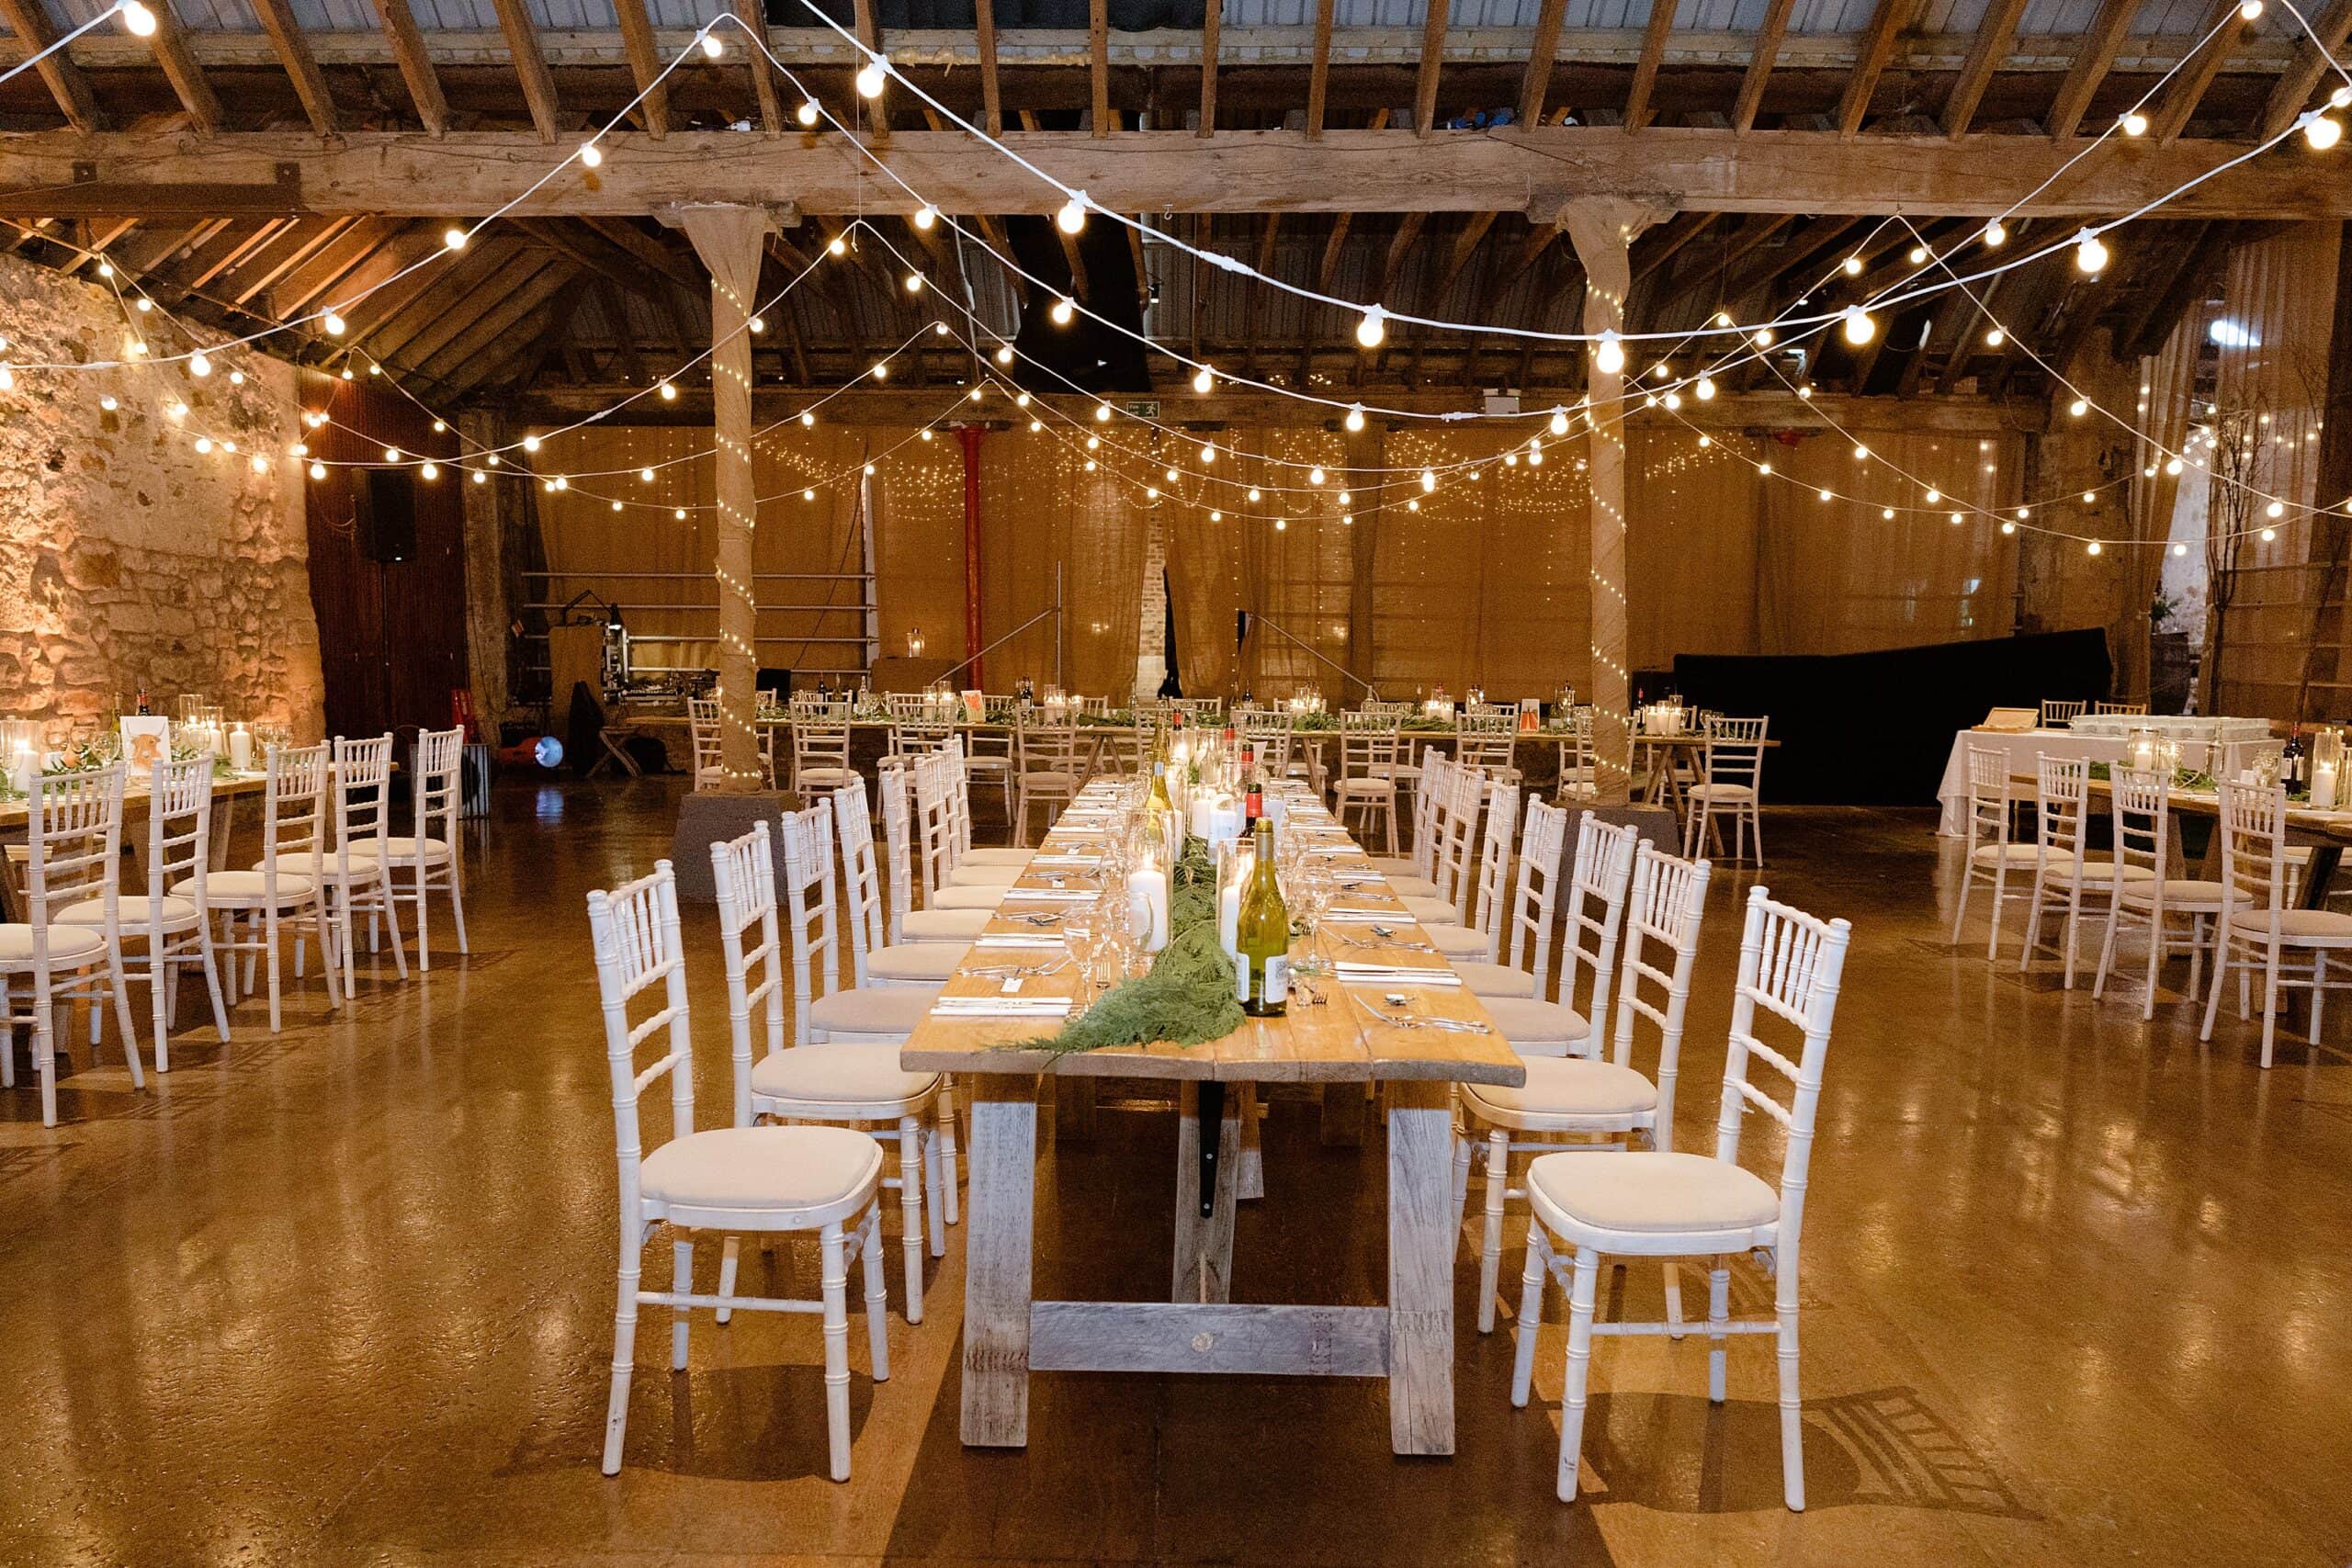 interior inside view of a scottish farm wedding venue with tables and chairs set for dinner with festoon lights and wooden beams above photographed by st andrews wedding photographer